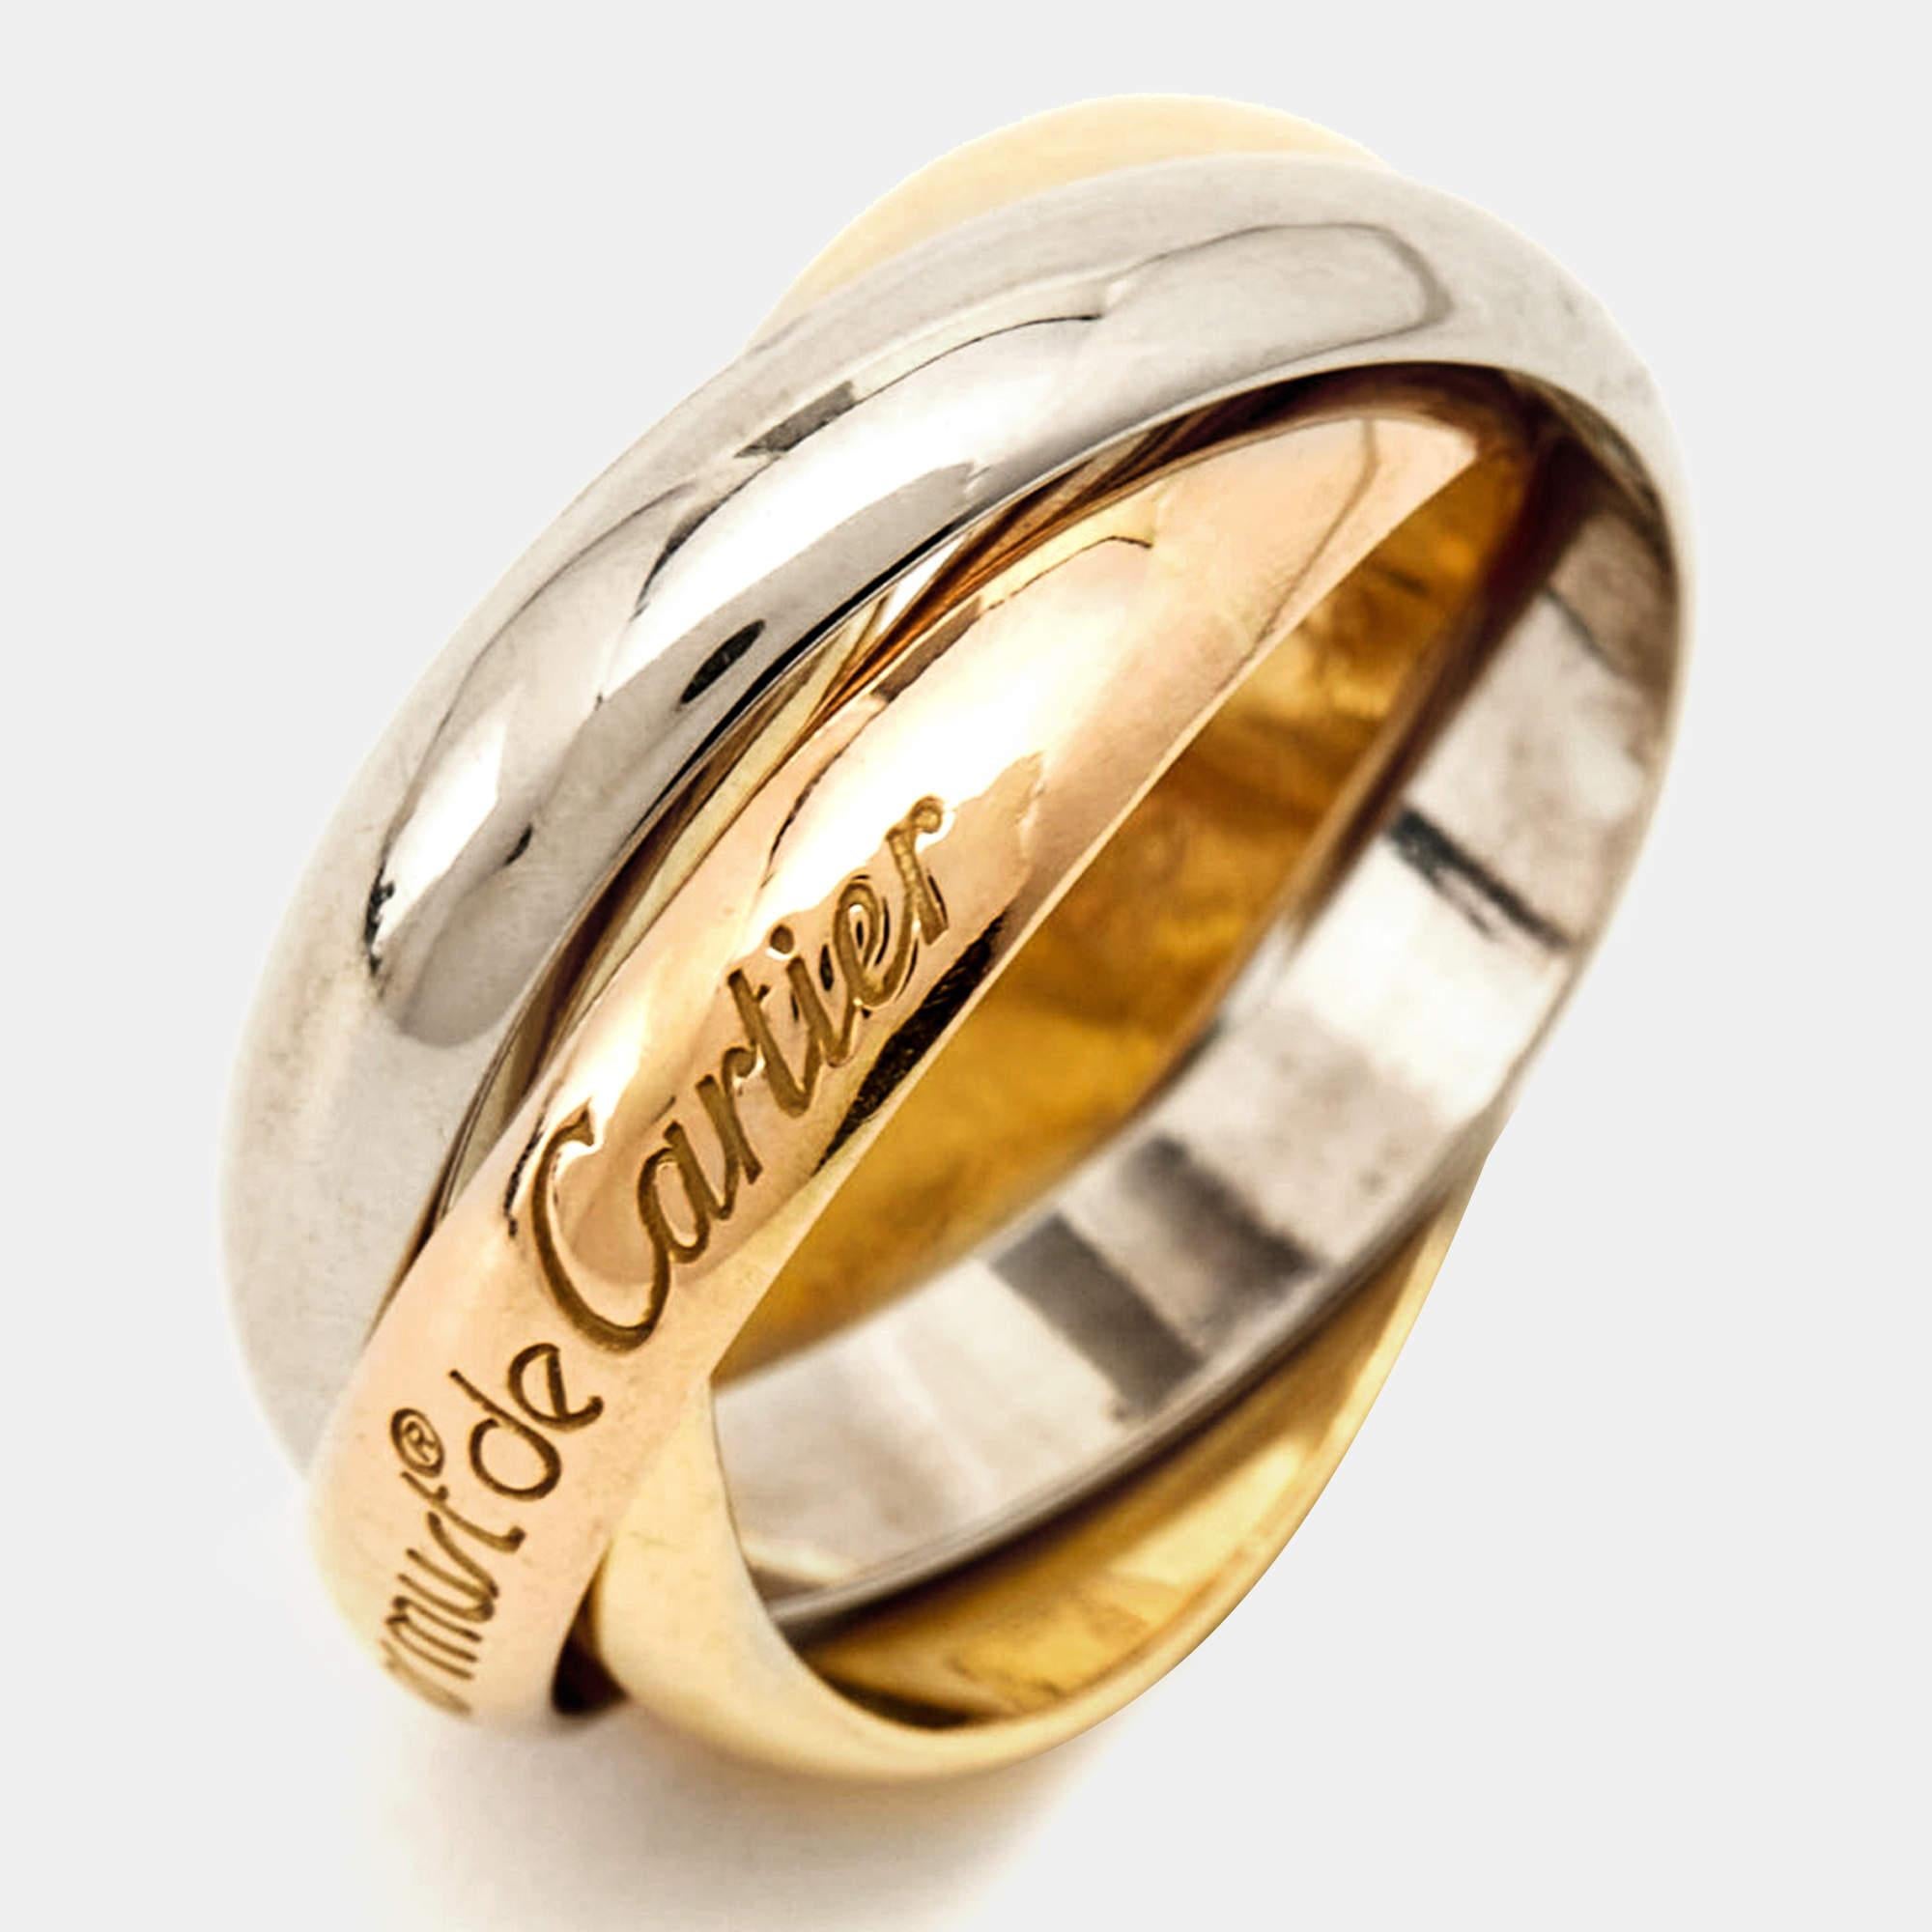 The Cartier Les Must de Cartier ring is an exquisite piece crafted in luxurious 18k yellow, white, and rose gold. With an iconic Cartier design, it features a seamless blend of elegance and sophistication, making it a timeless and coveted